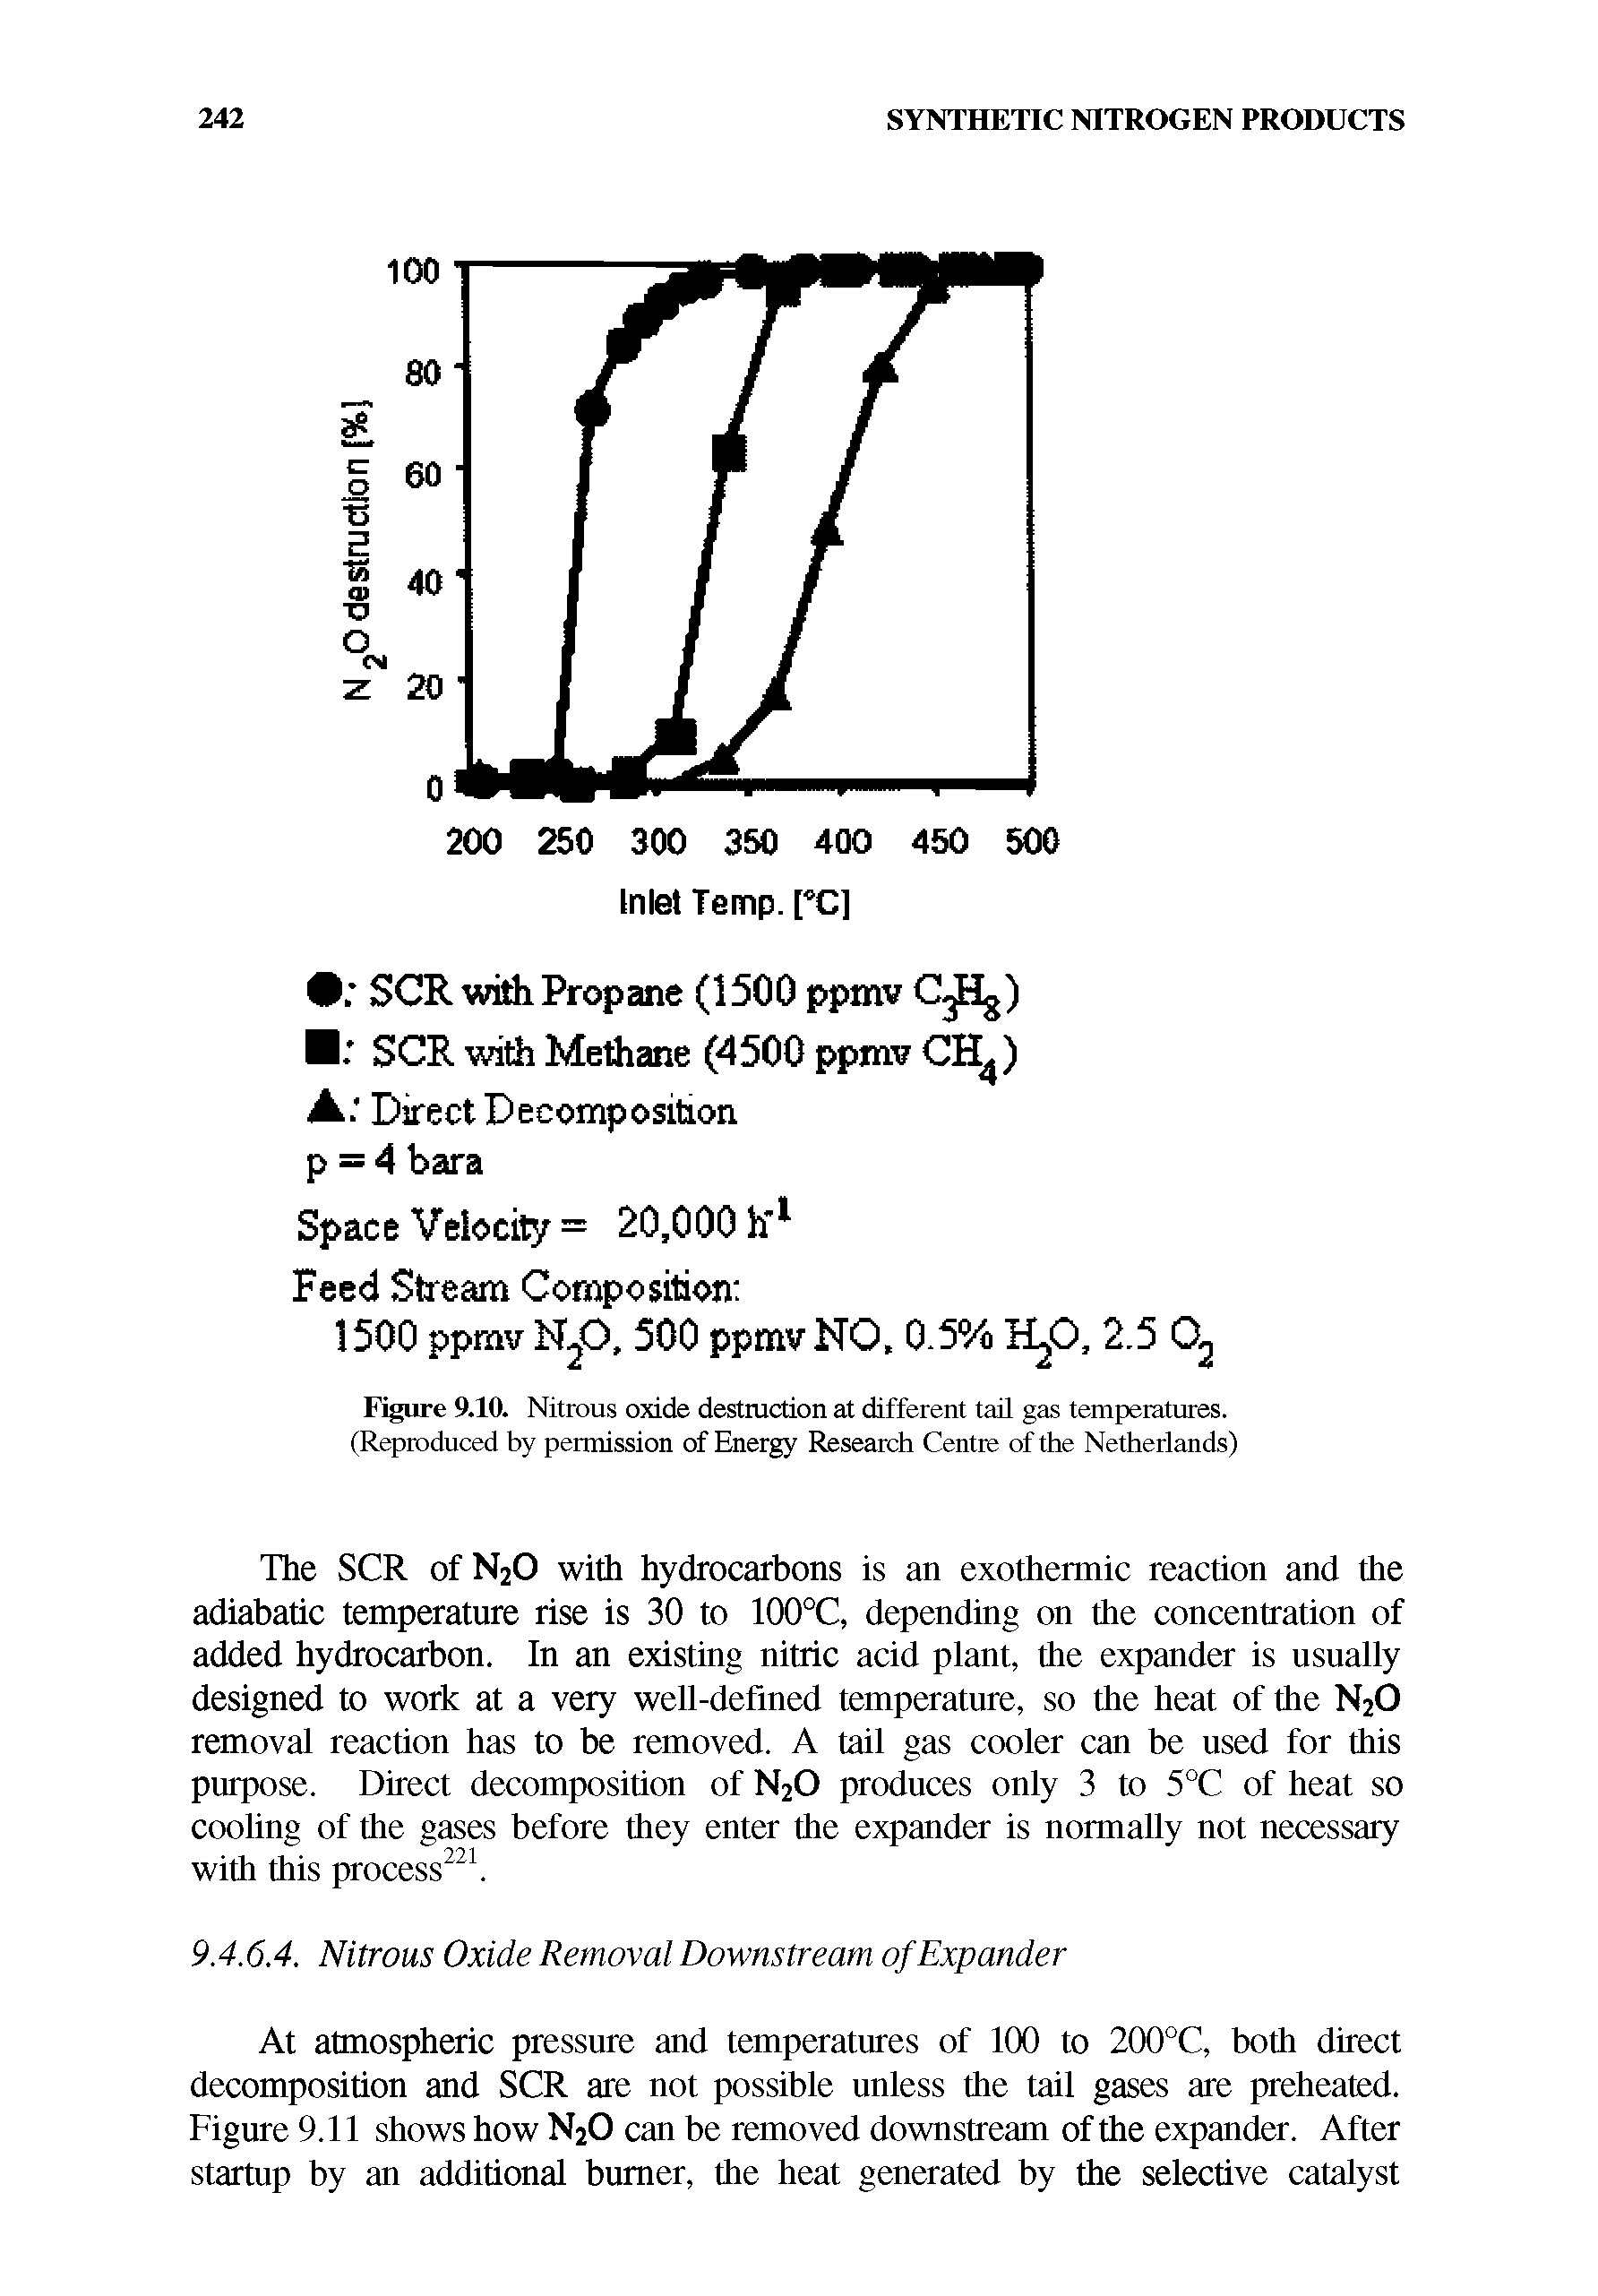 Figure 9.10. Nitrous oxide destruction at different tail gas temperatures. (Reproduced by permission of Energy Research Centre of the Netherlands)...